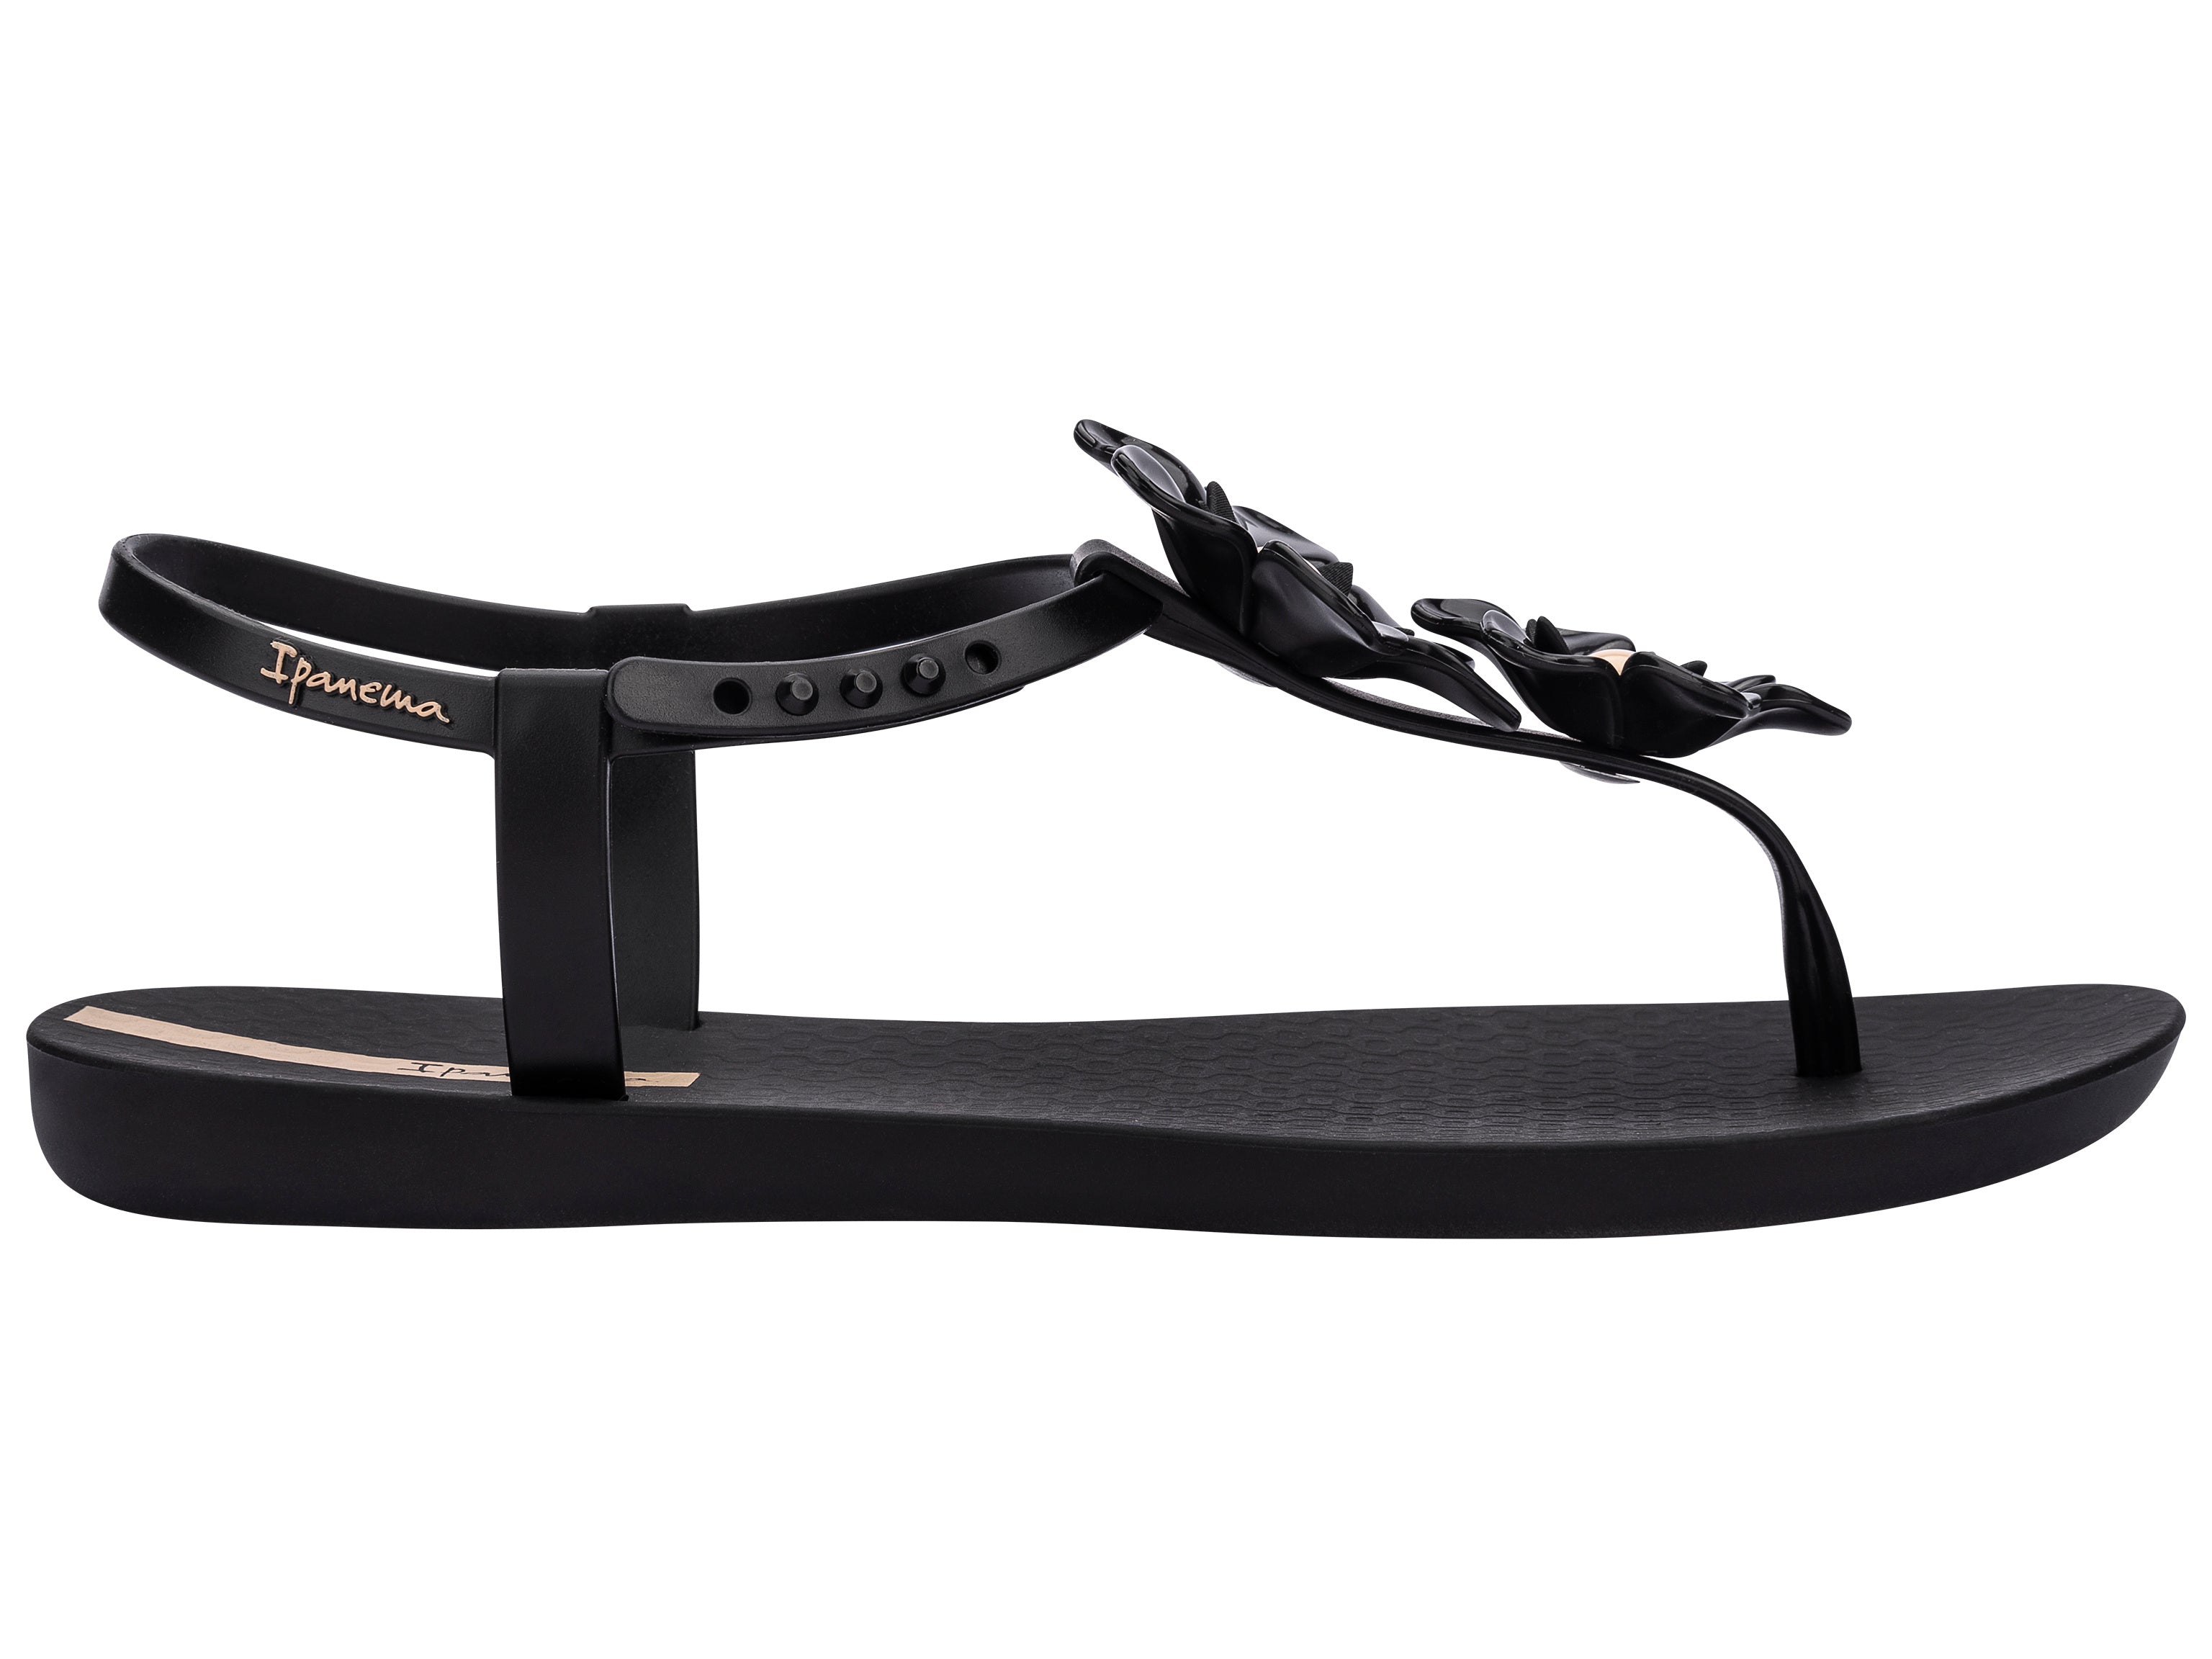 Outer side view of a black Ipanema Duo Flowers women's t-strap sandal with two flowers.